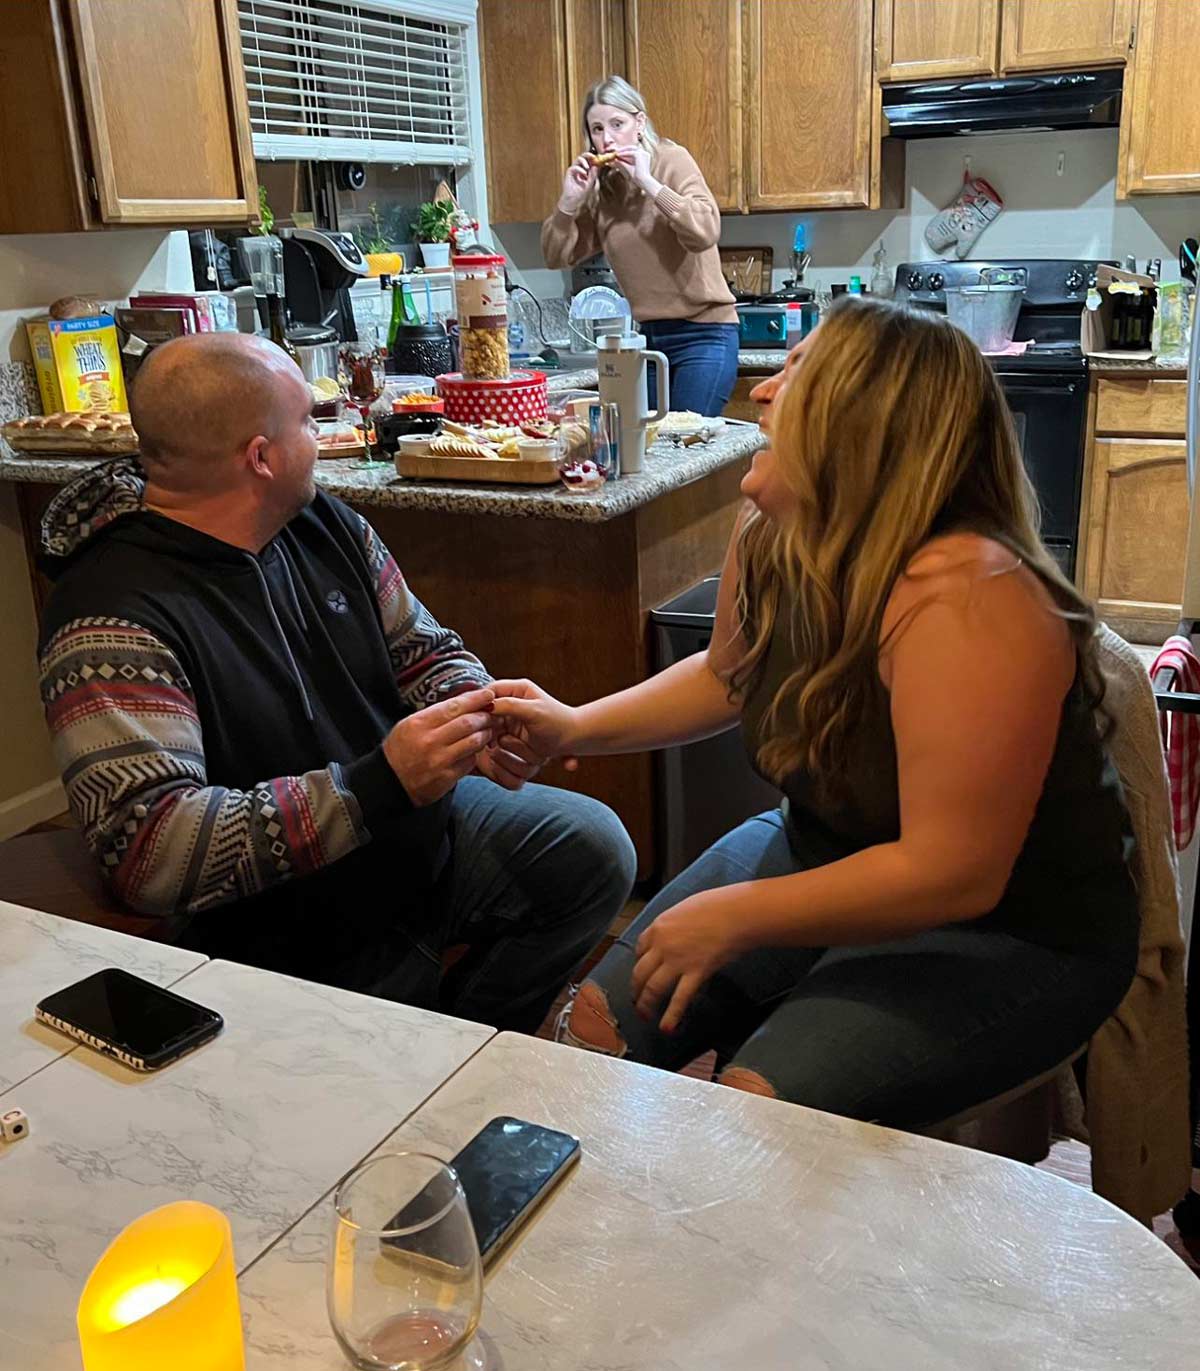 Our friend mid-chicken wing realizing I’m proposing to my girlfriend on NYE